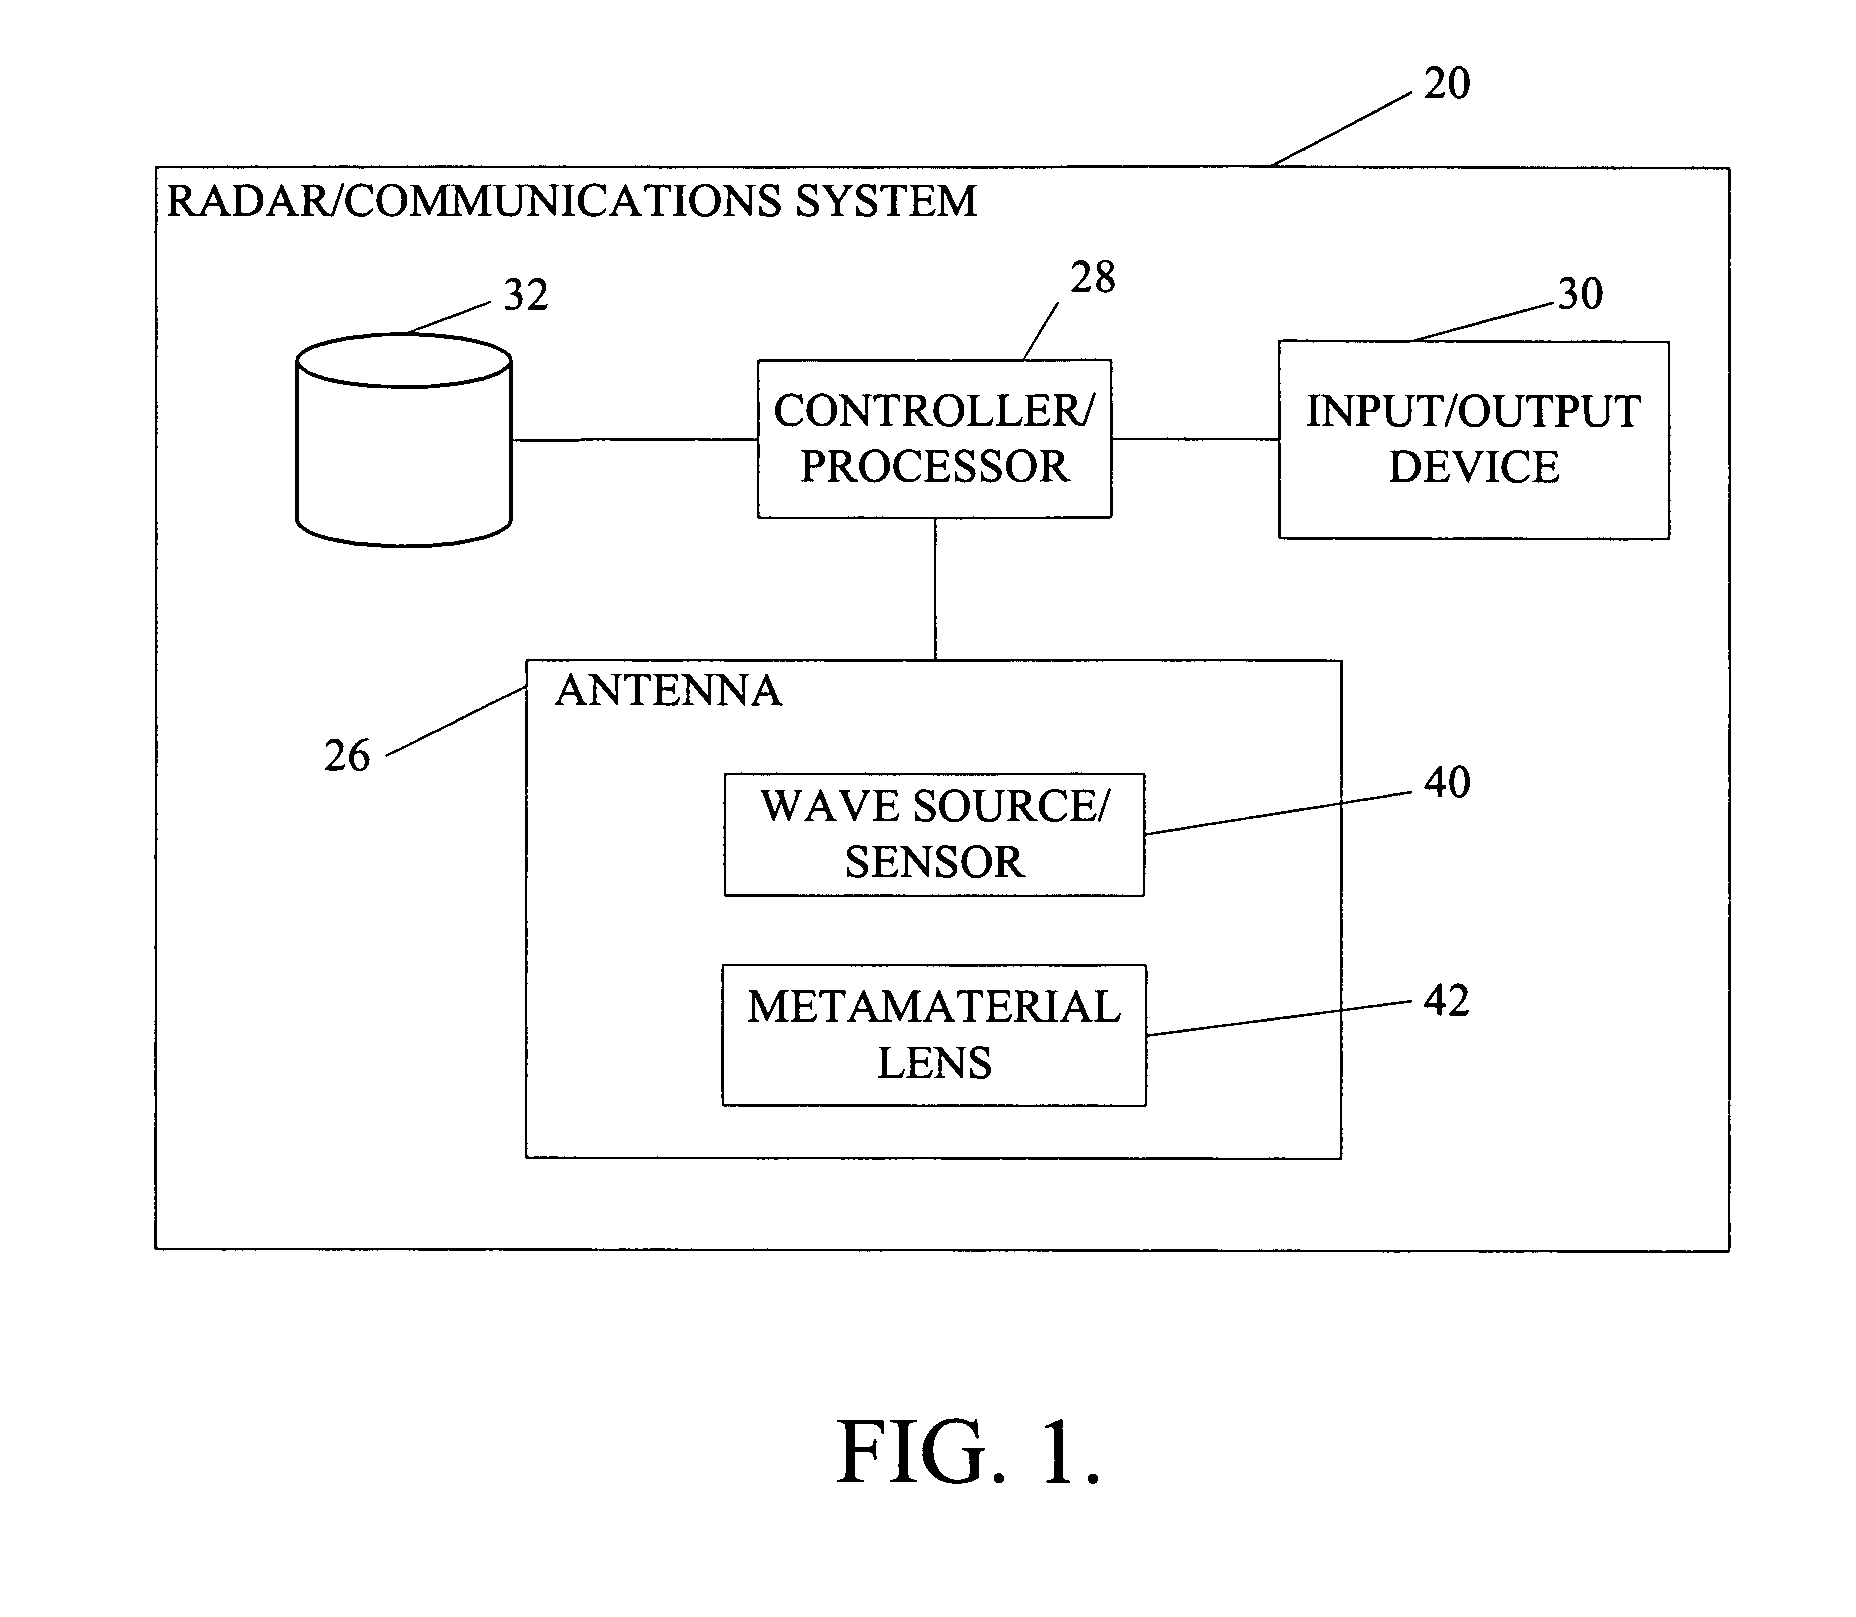 Metamaterial scanning lens antenna systems and methods